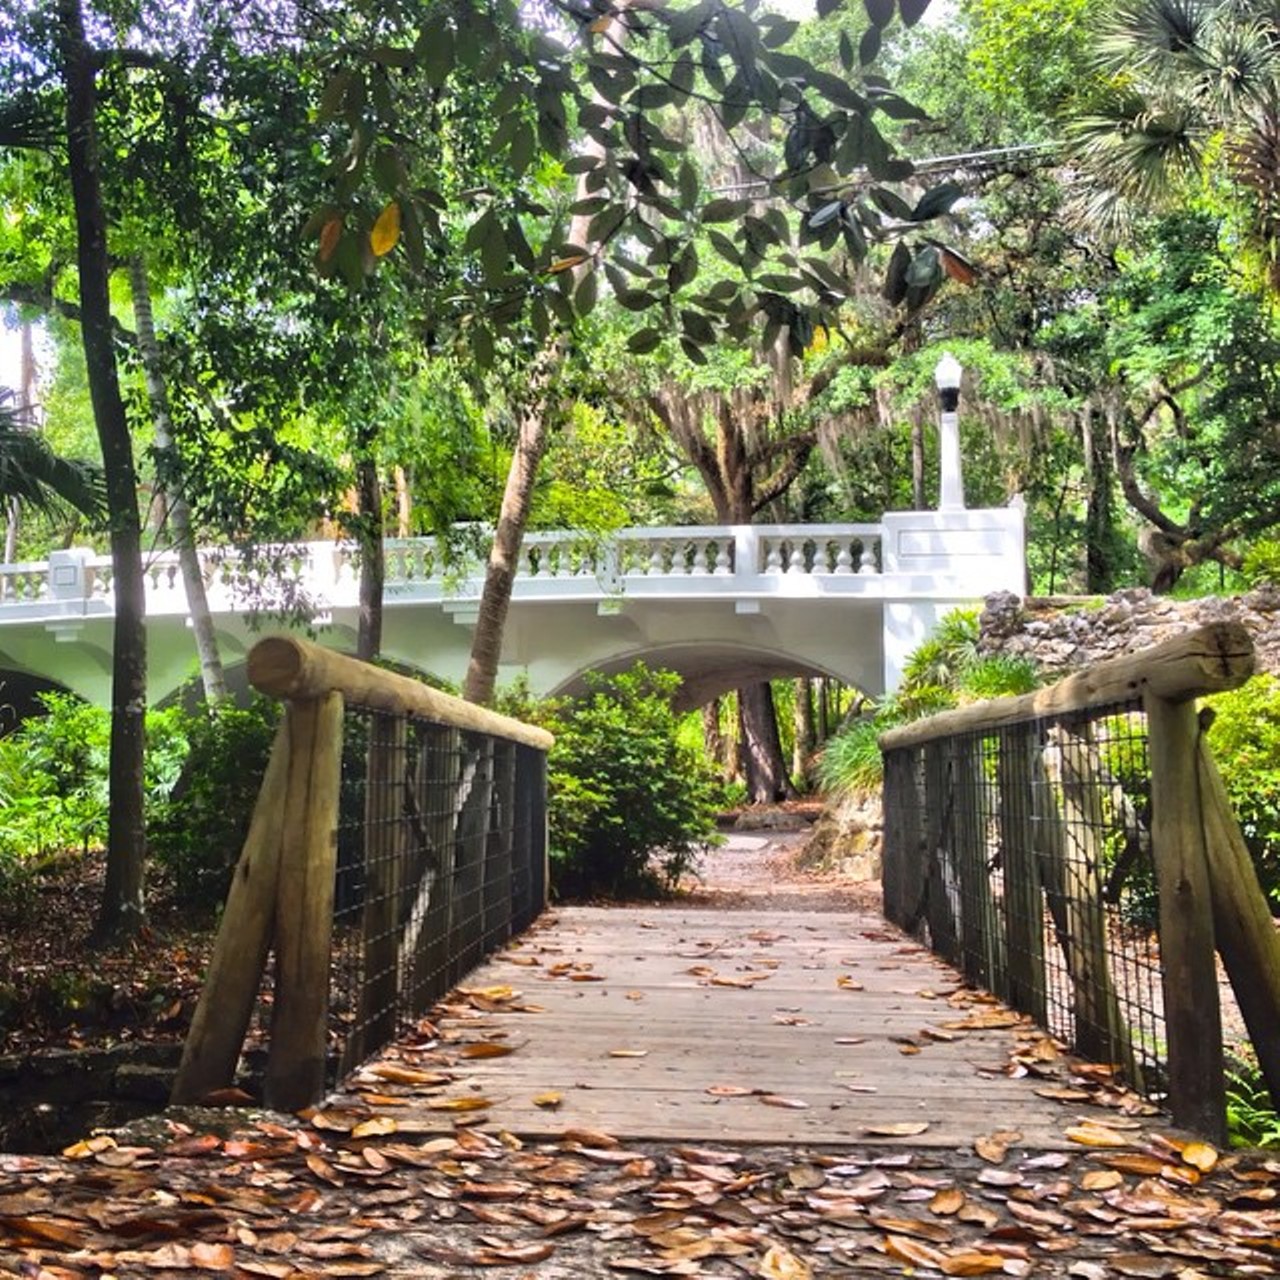 Dickson Azalea Park
100 Rosearden Dr.
The park is Orlando&#146;s only cultural landscape which also serves as a historic landmark. They broke ground back in 1933 and the park was later dedicated to Orlando businessman Henry Hill Dickson, an &#147;advocate of the city&#146;s beautification&#148;. 
Photo via jameycic/Instagram